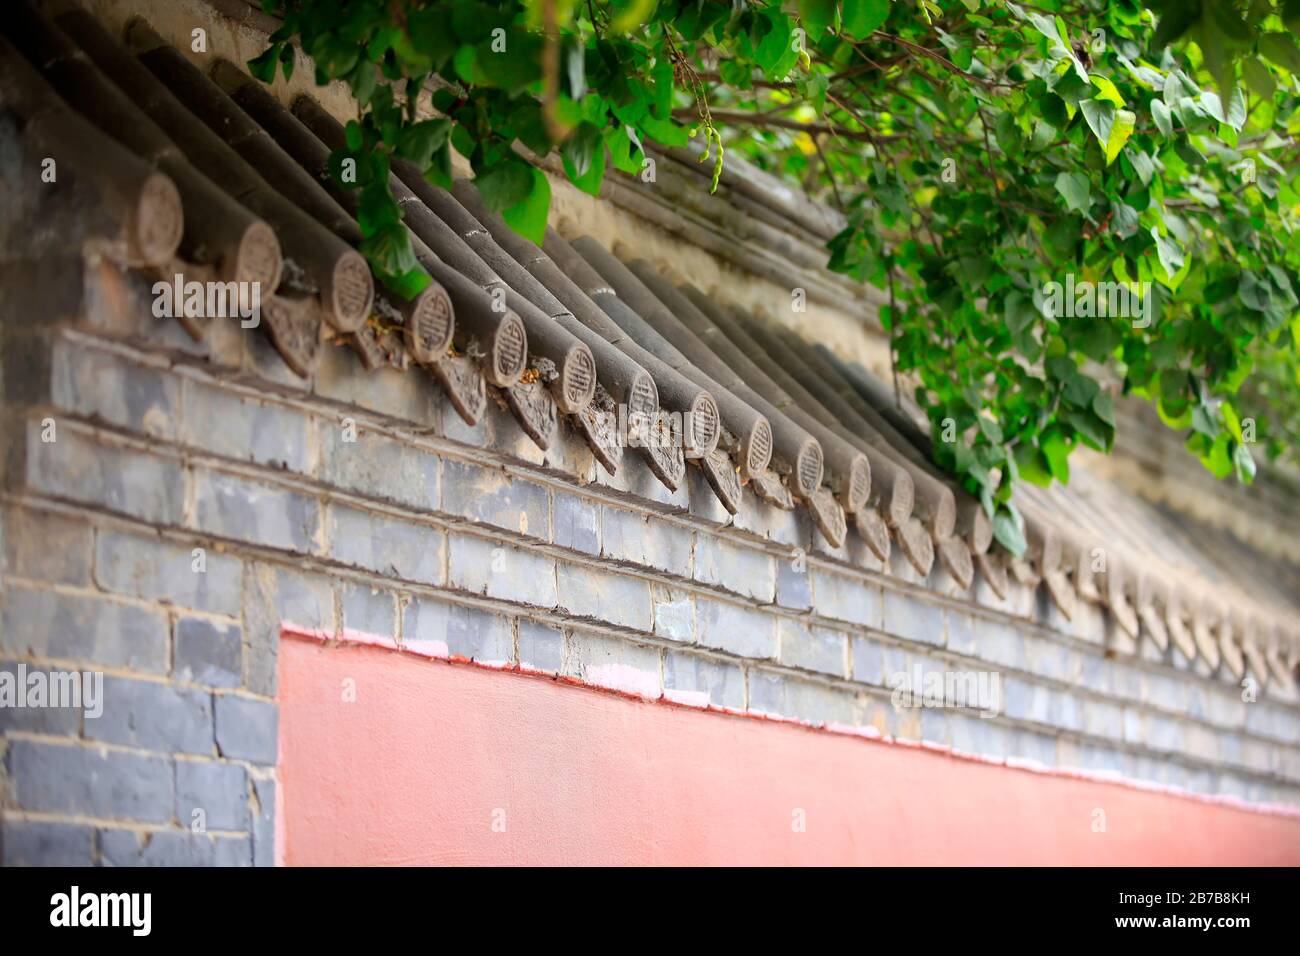 The eaves of the ancient Chinese architecture Stock Photo